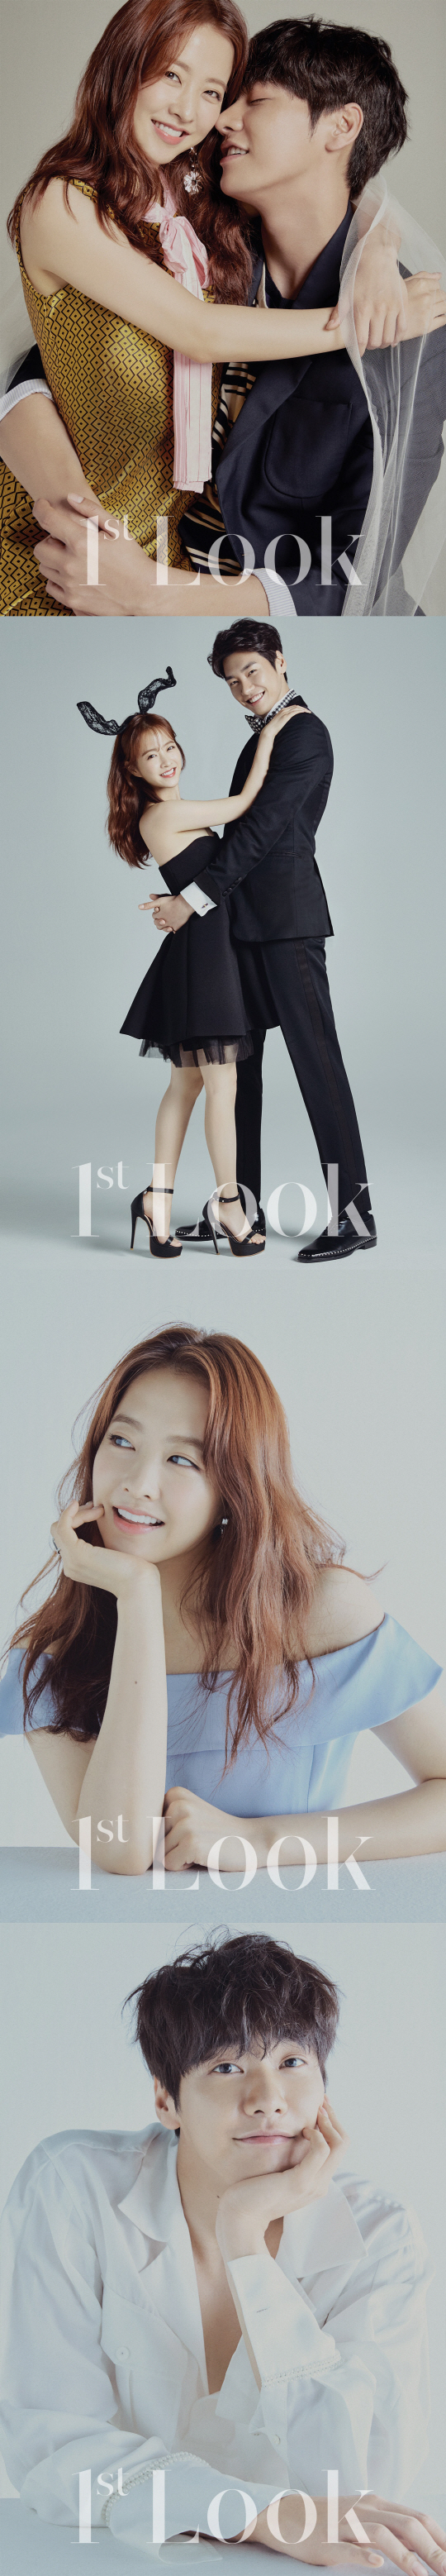 The only romance movie Your Wedding, which will give a pleasant excitement to the theater this summer, will focus attention on the first look picture of Park Bo-young and Kim Young-kwang.The film  depicts Seung Hee (Park Bo-young) and Kim Young-kwang (who are only destined for 3 seconds), their dased First Love Chronology, which is rarely timed.Park Bo-young and Kim Young-kwang of Your Wedding, which contains the first love chronicle of various emotions ranging from college students, students, and early years of society to freshness, excitement, and dizziness, have released the perfect chemistry through first look pictures.The picture released this time attracts attention with the warm visuals and fashionable appearance of the First Love couple Park Bo-young and Kim Young-kwang, who are excited to see <Your Wedding>.Park Bo-young of Seung Hee station, who believes in the fateful love that falls in three seconds, emits a unique charm with pastel tone fresh and feminine one piece styling.Kim Young-kwang, who is a straight-line unfortunate station looking only at Seung Hee, captures the attention of those who create a comfortable and natural atmosphere with a simple shirt.Kim Young-kwang, wearing a black suit perfectly equipped with Park Bo-young and Botai who gave points to the hair band, has created a couple of looks, and Kim Young-kwangs unique mix-match style, which is a simple suit and a wedding veil, It gets together and charm is doubled.In particular, Park Bo-young and Kim Young-kwang, who are smiling brightly with each other, can see the excitement and happiness of those who fall in love, and expect a couple chemistry to unfold in the movie.Park Bo-young and Kim Young-kwangs more diverse pictorial cuts and behind-the-scenes Kahaani on Your Wedding can be found in the August issue of First Look.The only romance movie to capture the theater this summer with the perfect couple Chemie of Kahaani, Park Bo-young and Kim Young-kwang, who are full of empathy that reminds us of our first love, is scheduled to open on August 22.